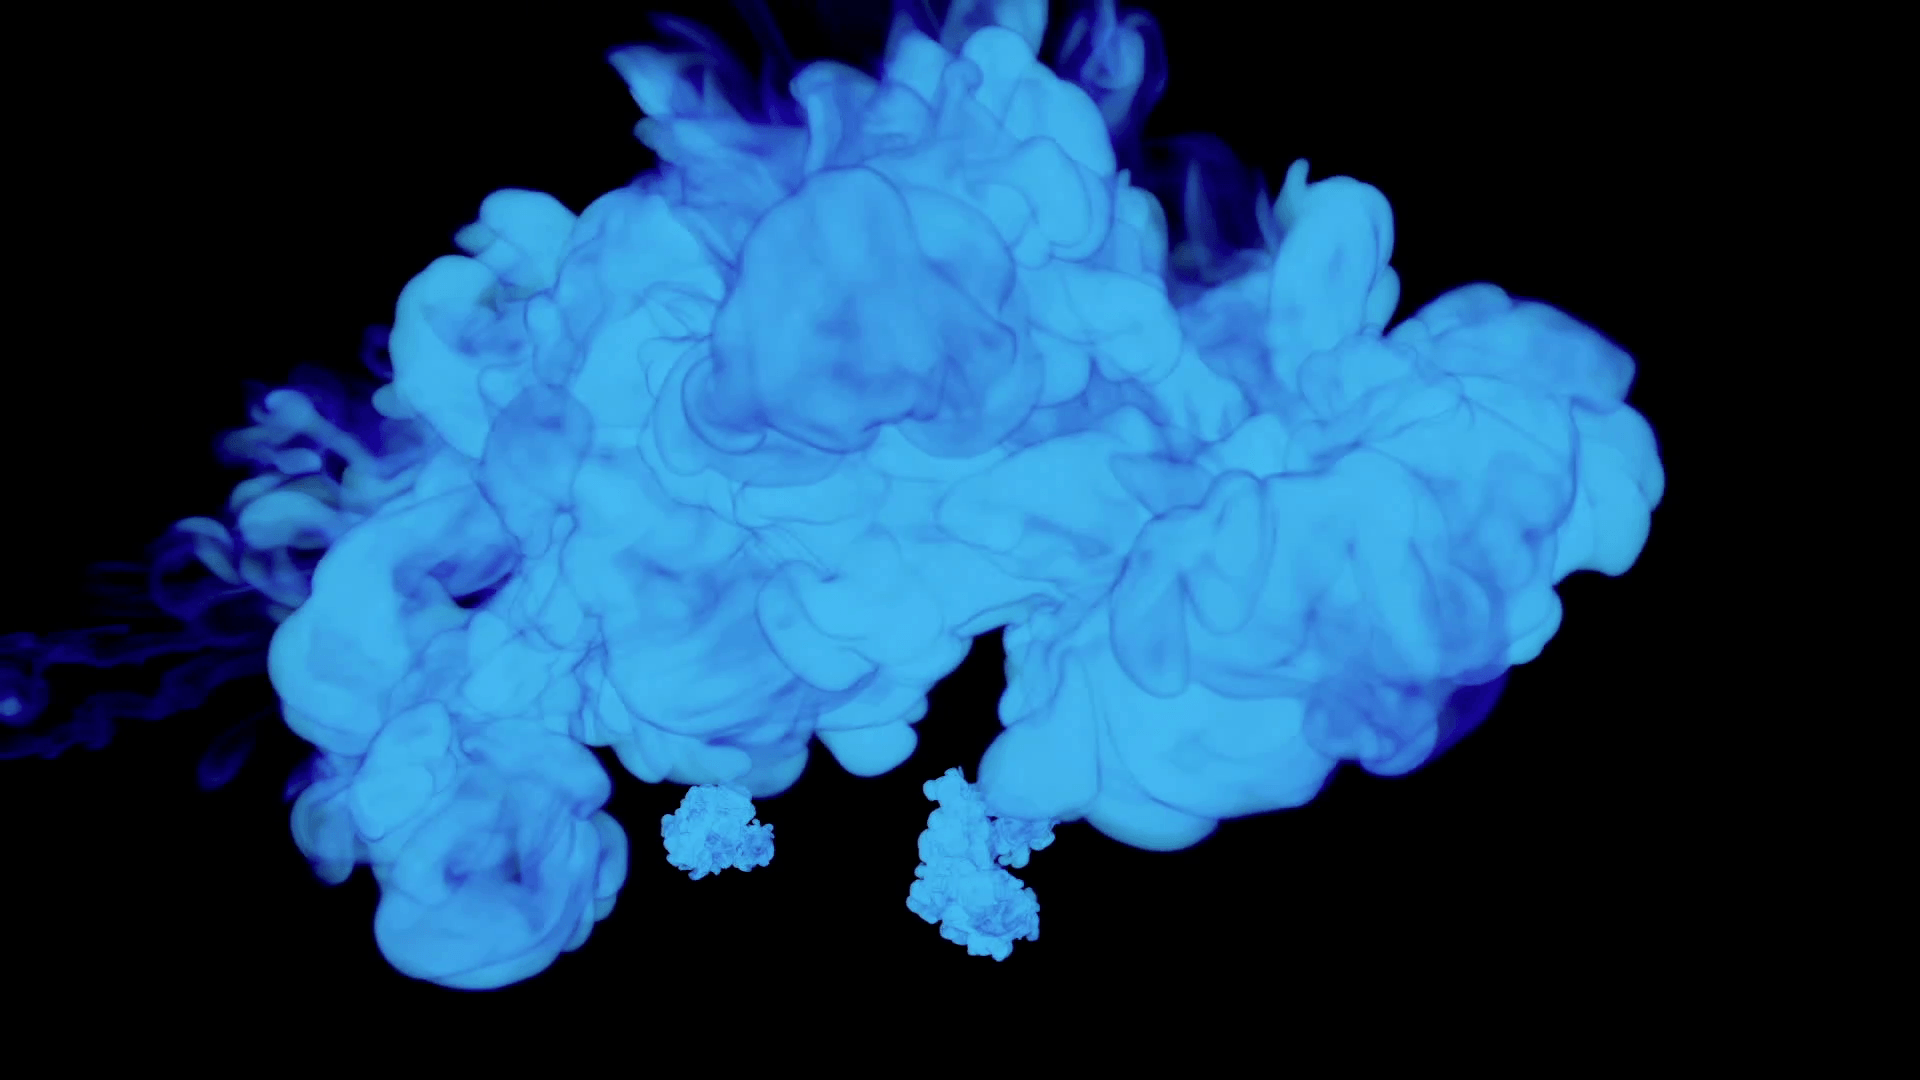 ABSTRACT BACKGROUND. BLUE SMOKE or BLUE INK IN WATER SERIES ON BLACK